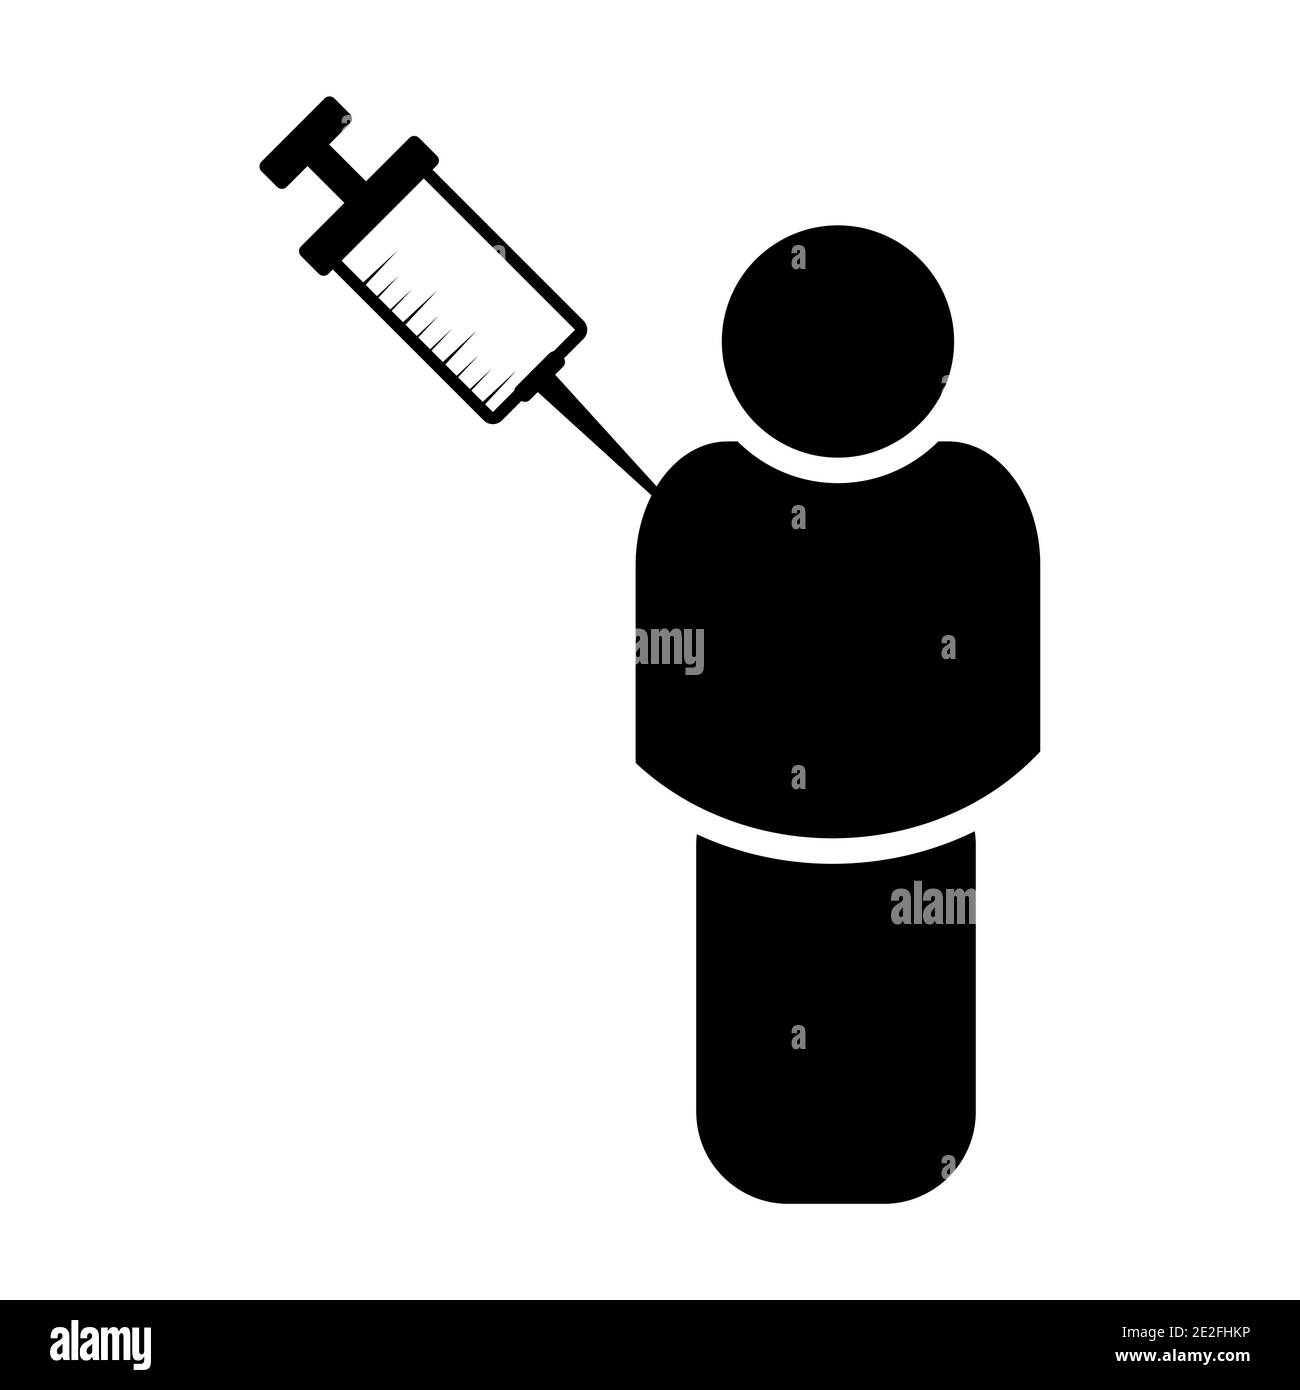 Vaccination symbol. Human body icon with syringe contains vaccine against covid-19. Coronavirus protection shot. Black vector shape isolated on white Stock Vector